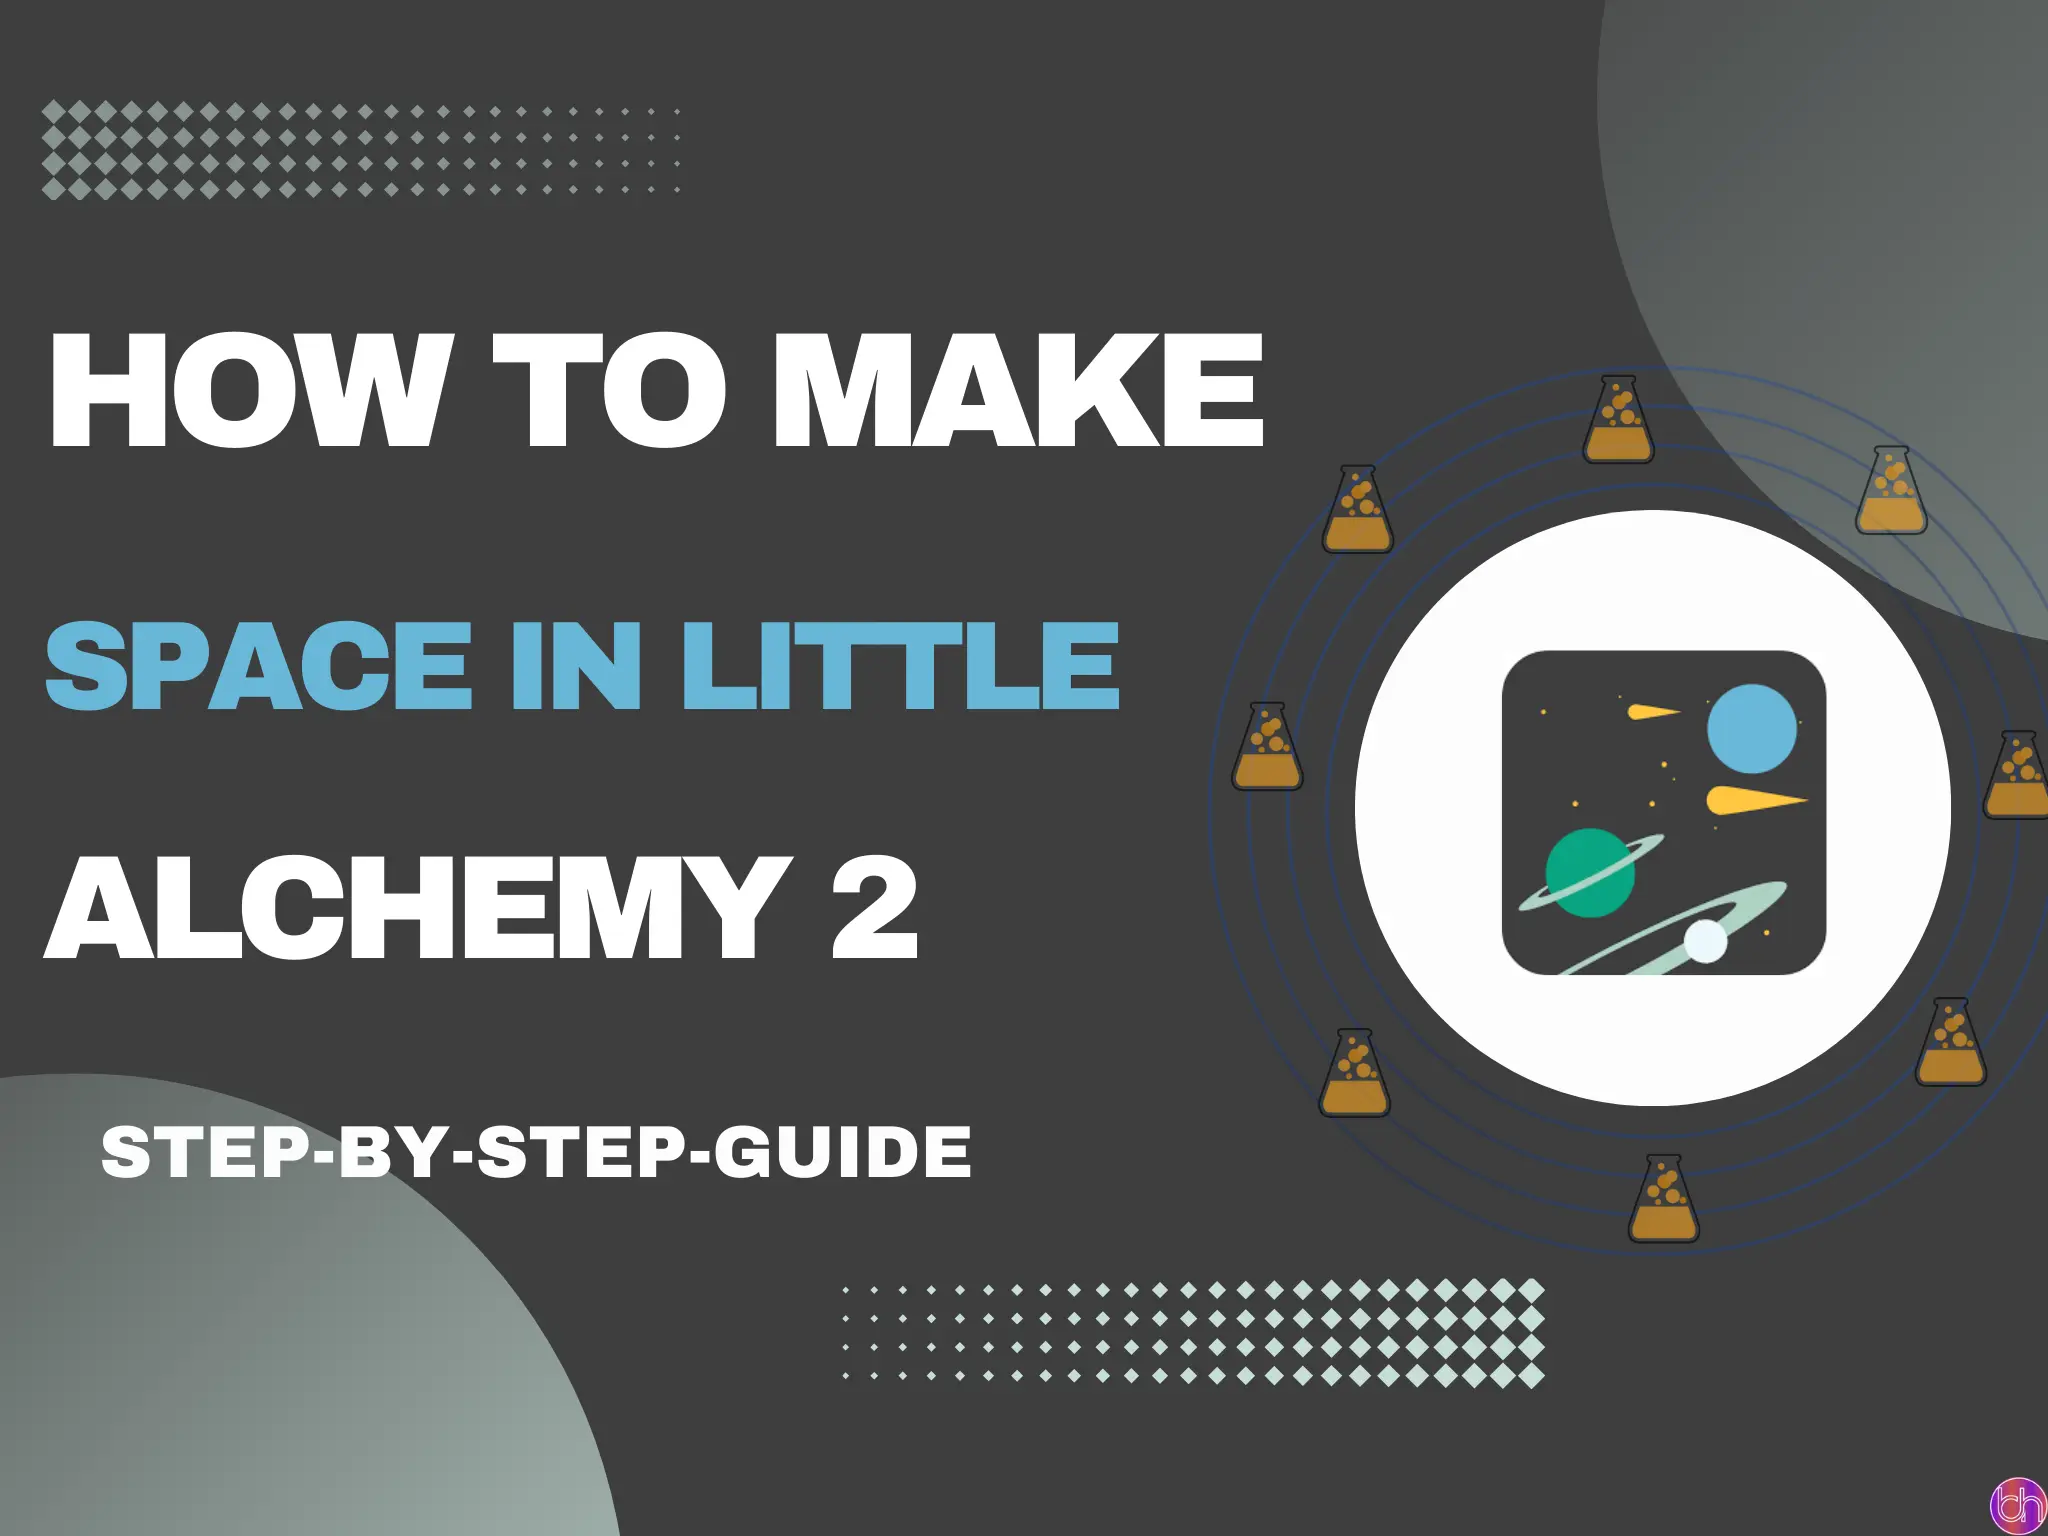 How to make Space in little alchemy 2